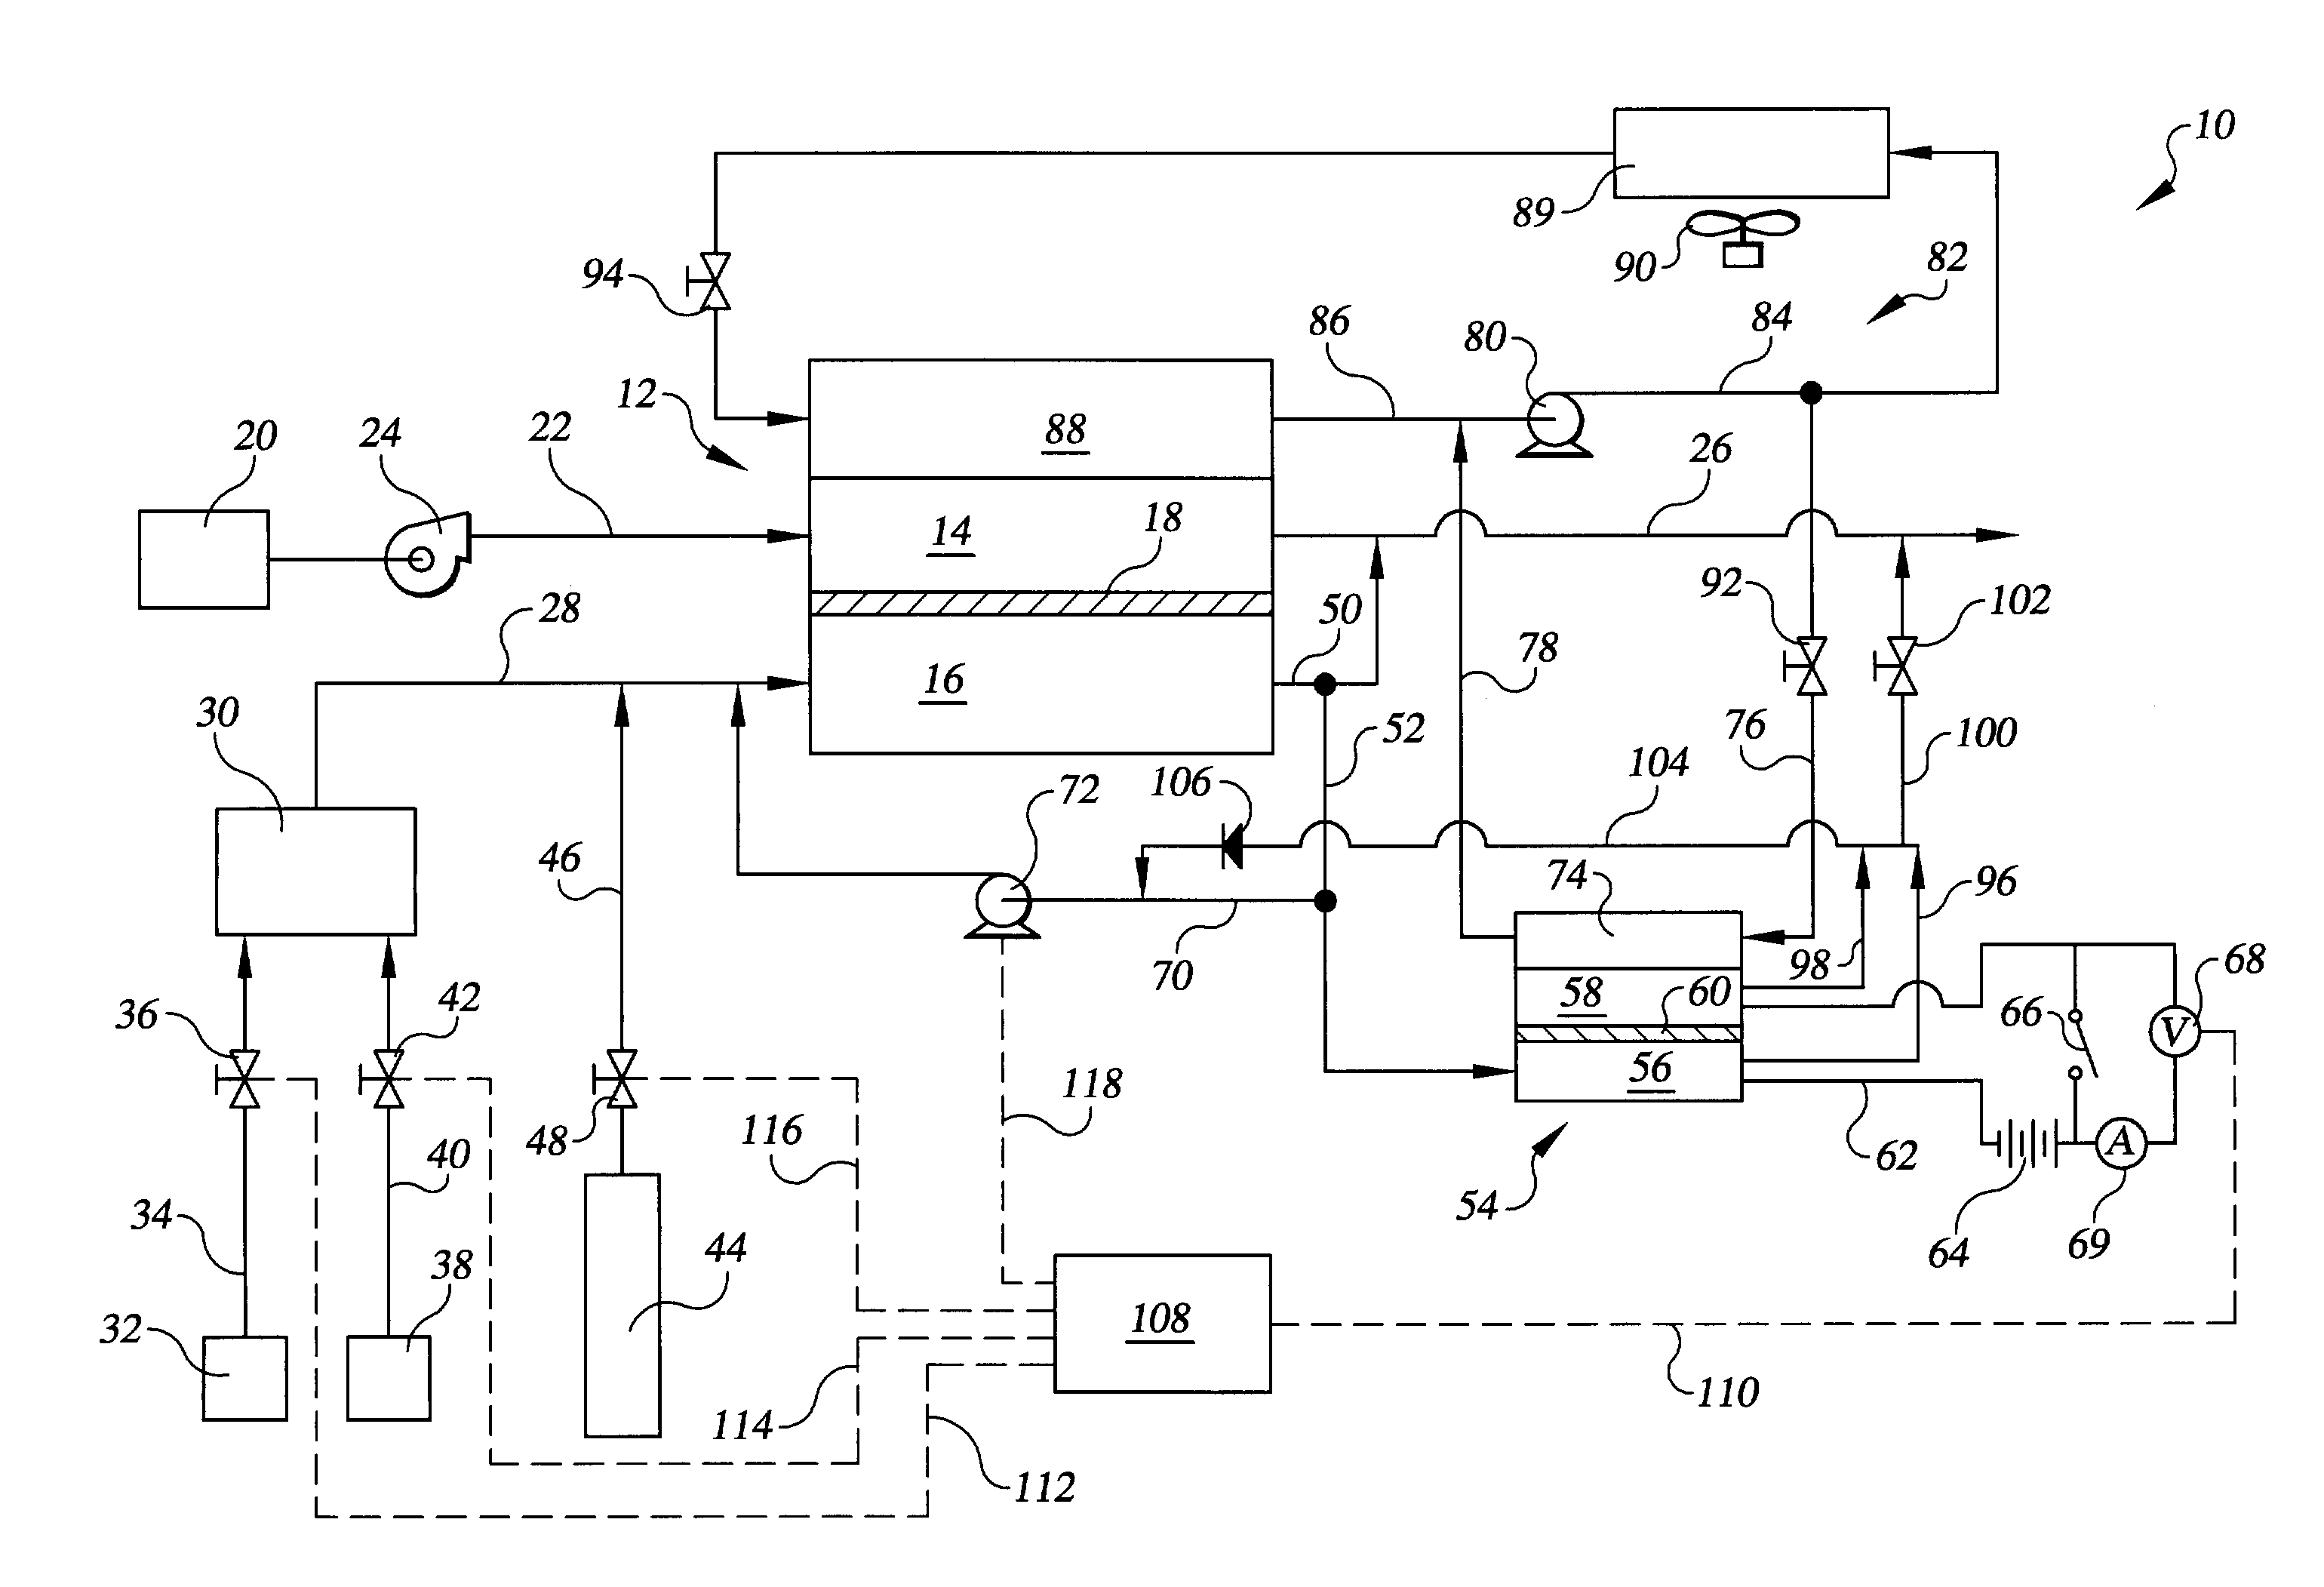 Fuel cell power plant having a fuel concentration sensor cell